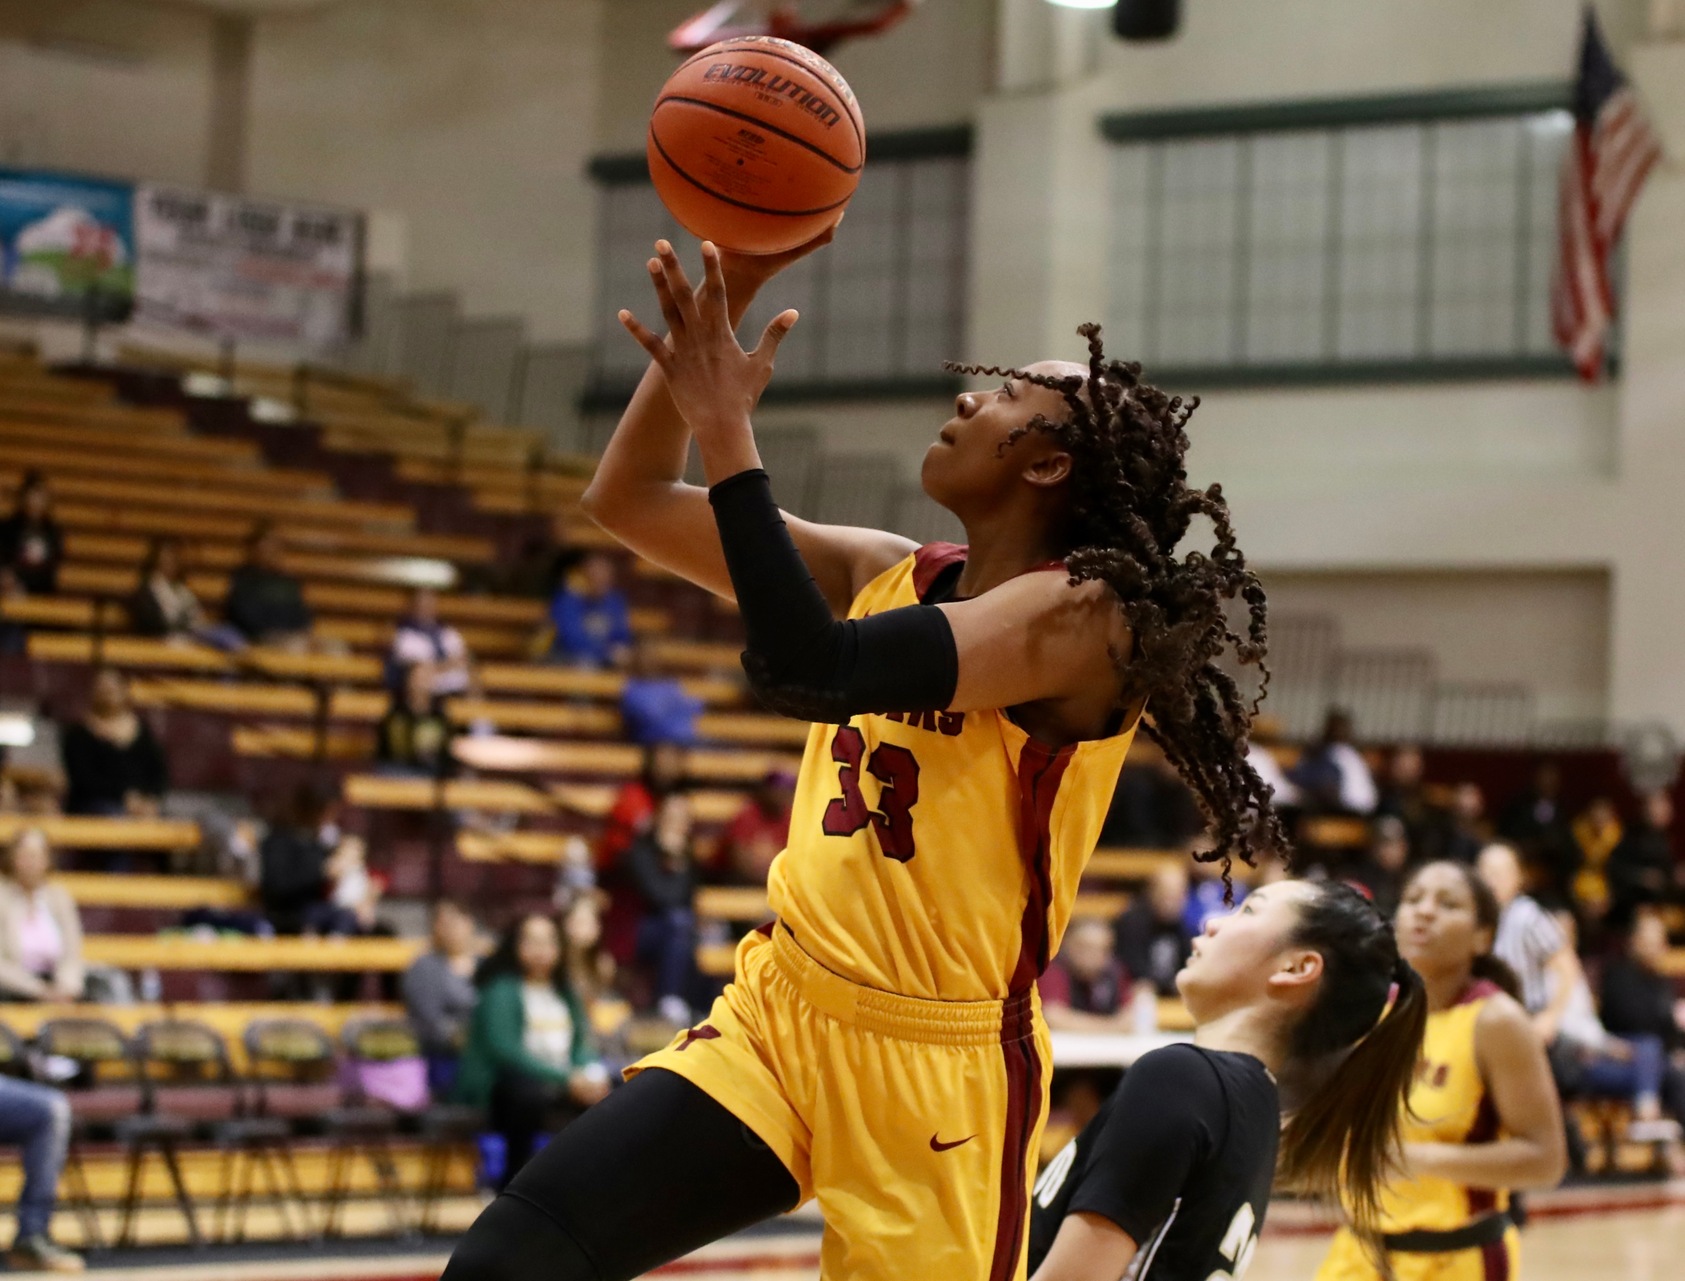 Dariel Johnson picked up her second consecutive 20-20 double-double in points and rebounds Friday night, photo by Michael Watkins.